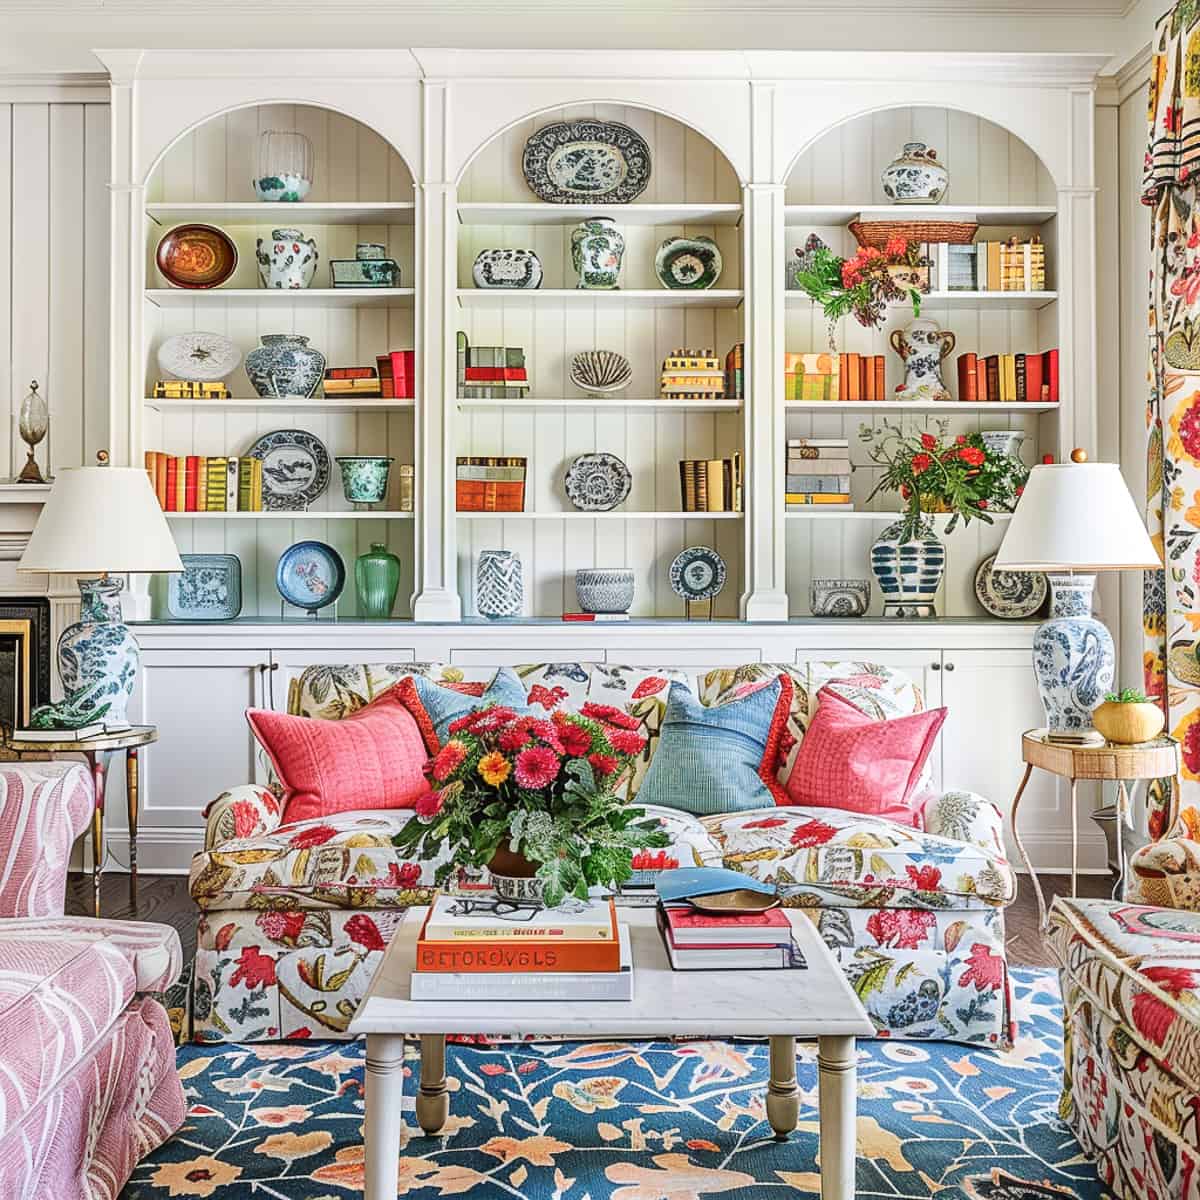 Shelf Decor Ideas: The Ultimate Guide to Styling Shelves